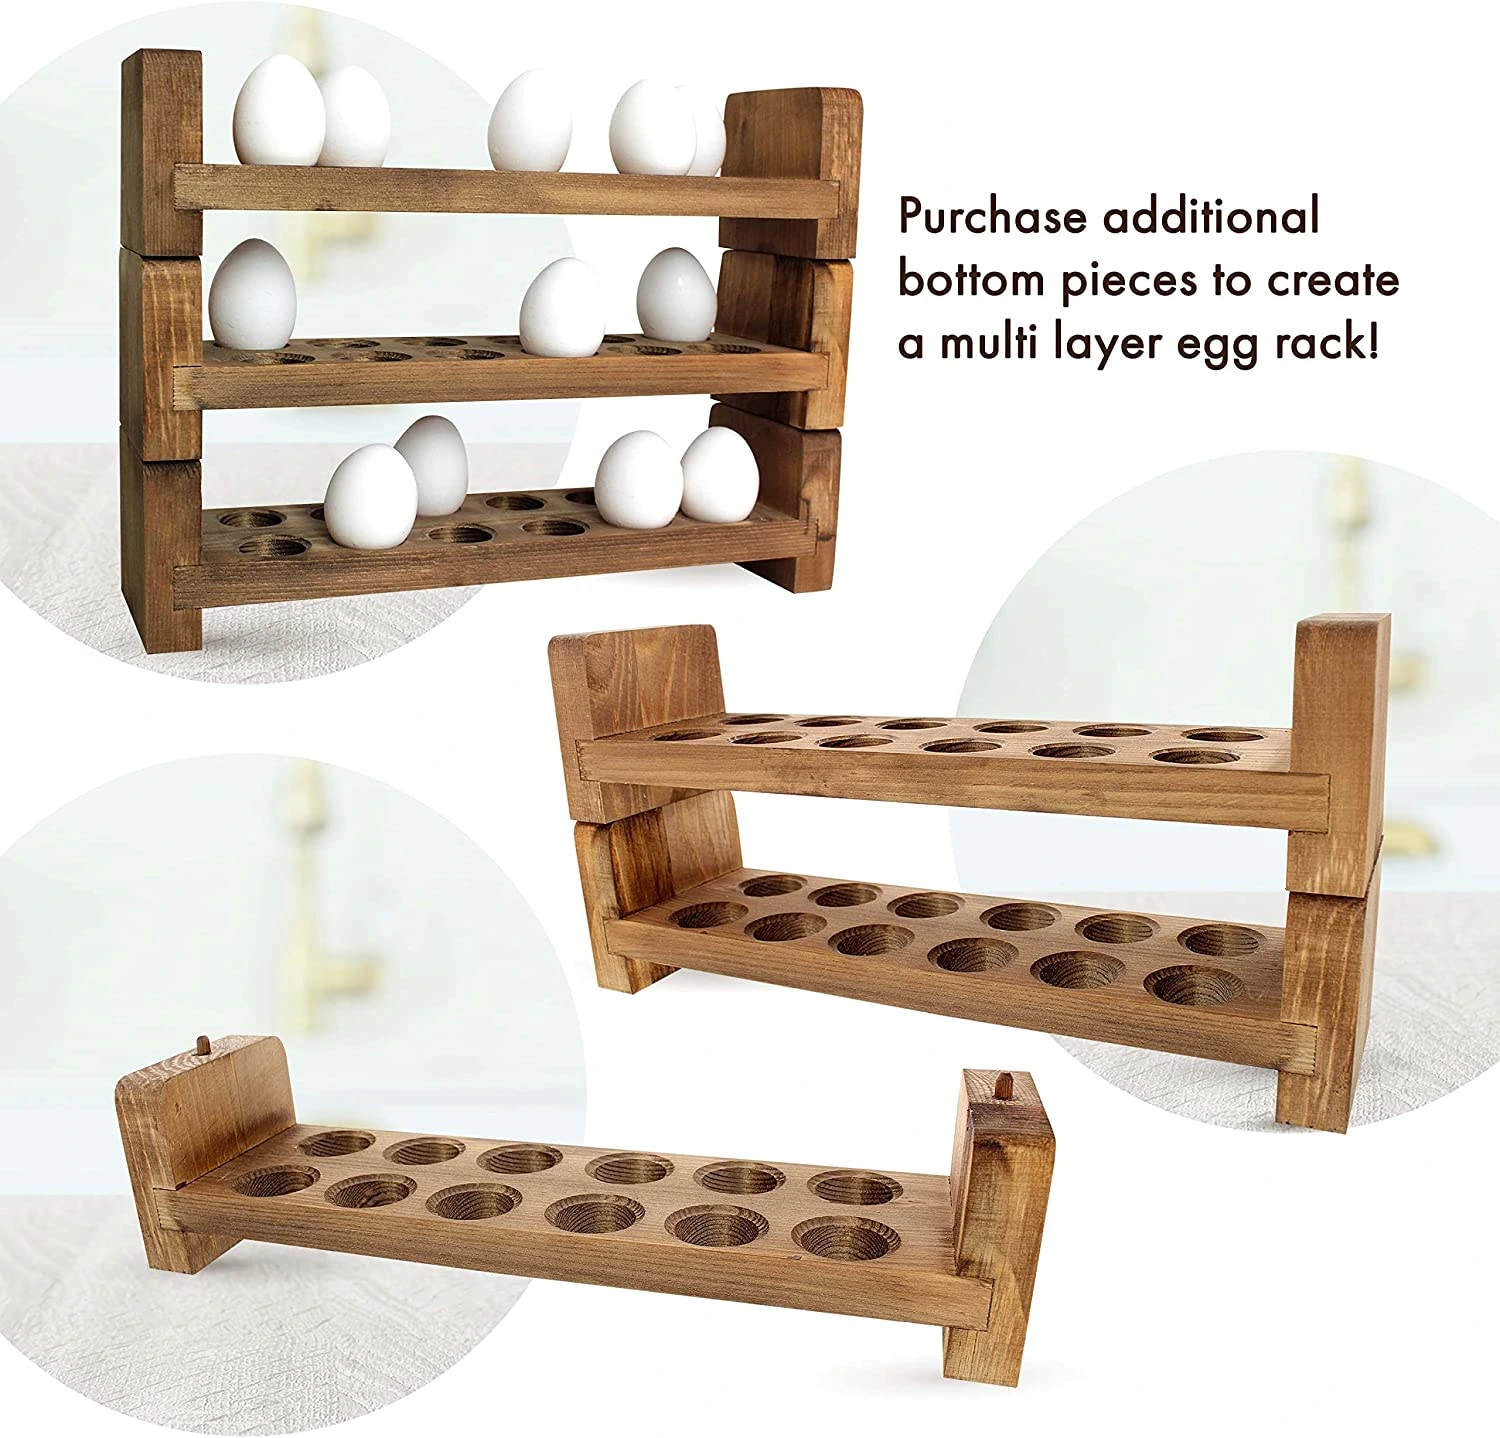 Purchase additional bottom pieces to create a multi-layer egg rack